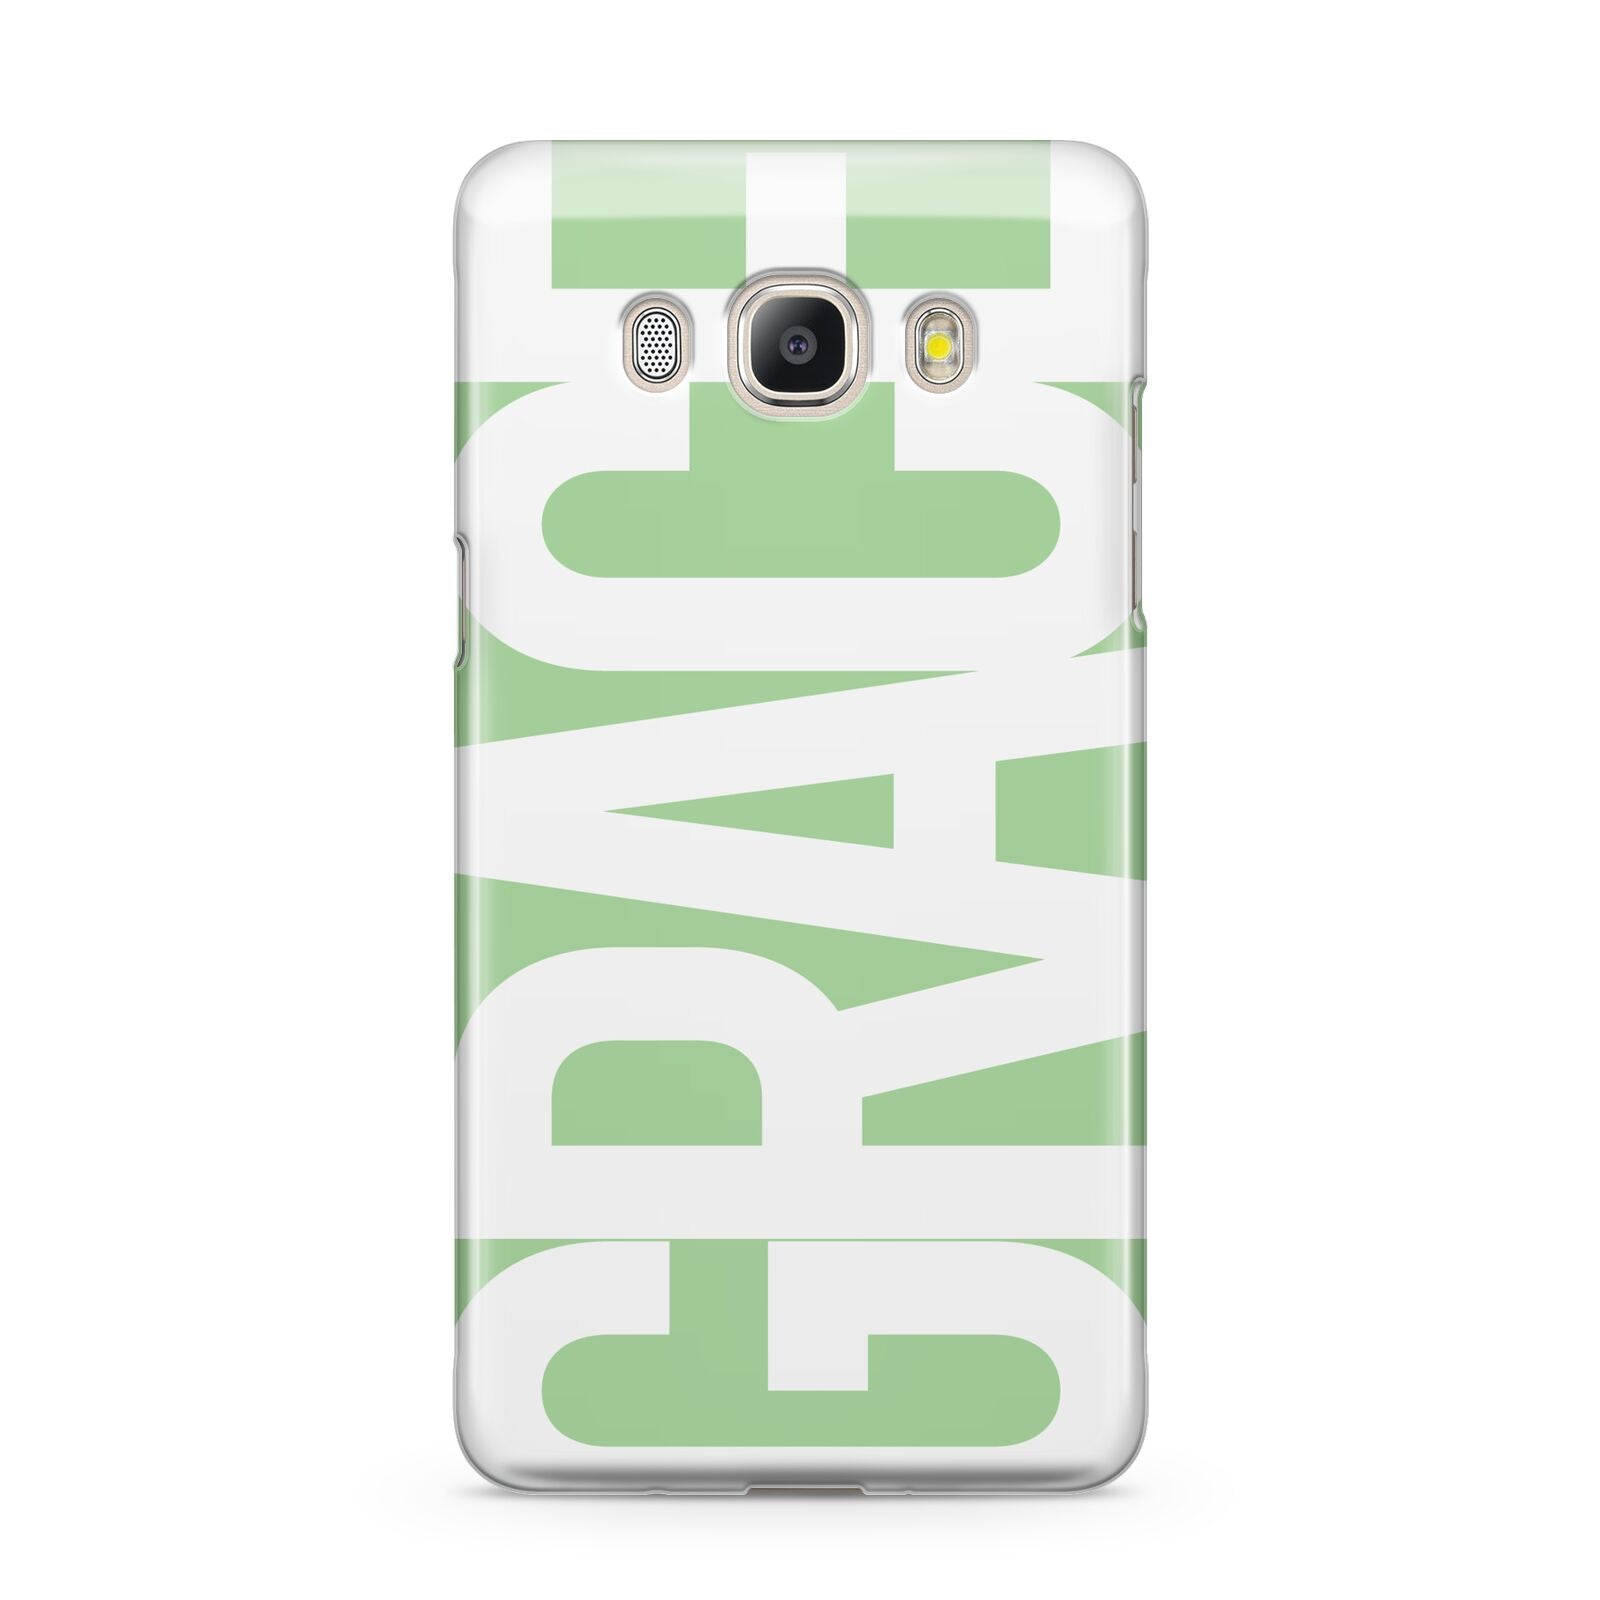 Pale Green with Bold White Text Samsung Galaxy J5 2016 Case